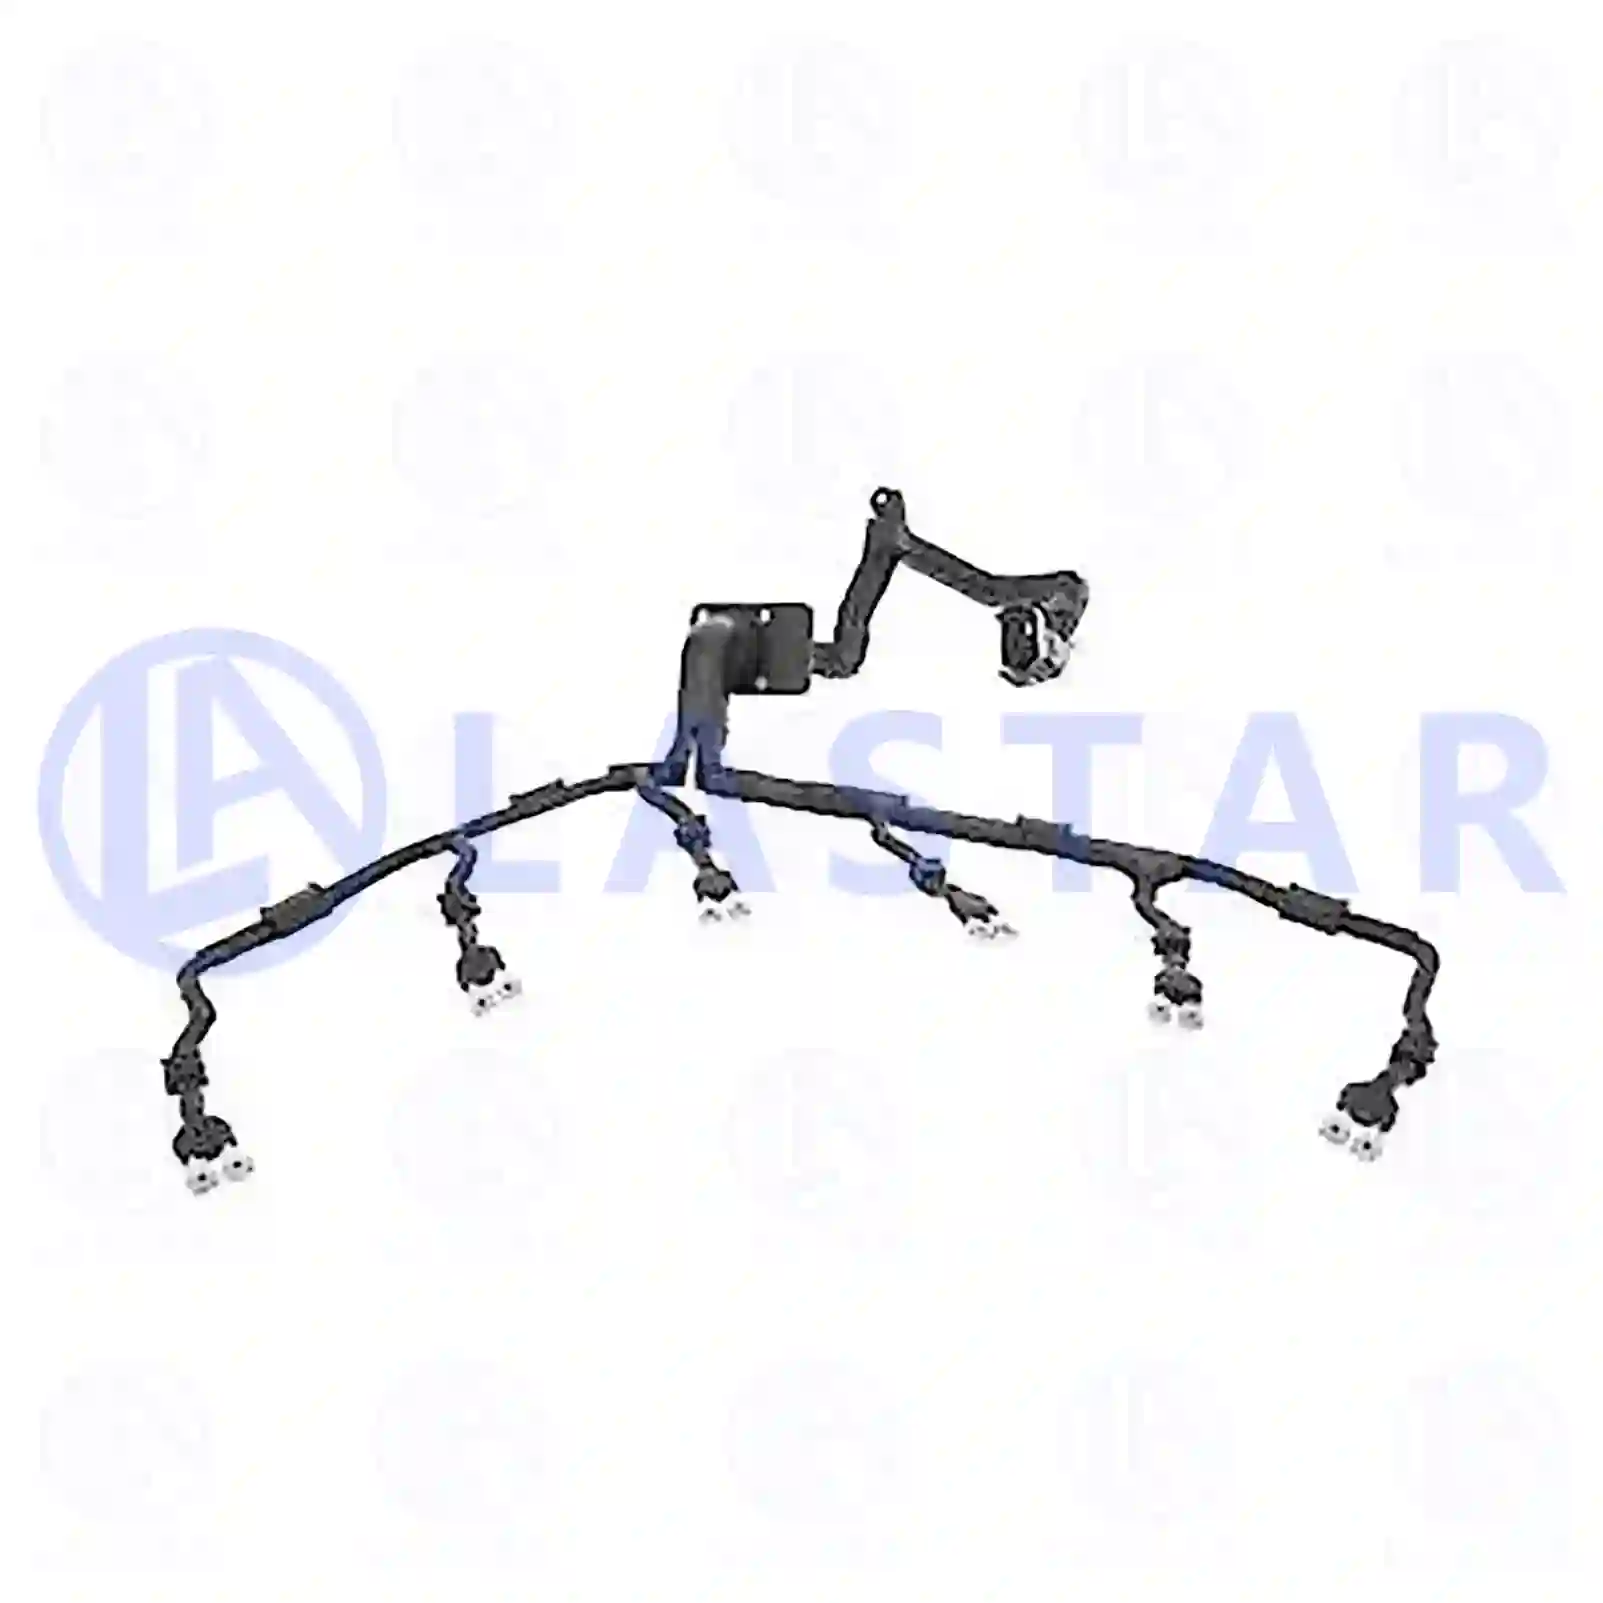 Cable harness, 77718598, 51254136267, 5125 ||  77718598 Lastar Spare Part | Truck Spare Parts, Auotomotive Spare Parts Cable harness, 77718598, 51254136267, 5125 ||  77718598 Lastar Spare Part | Truck Spare Parts, Auotomotive Spare Parts